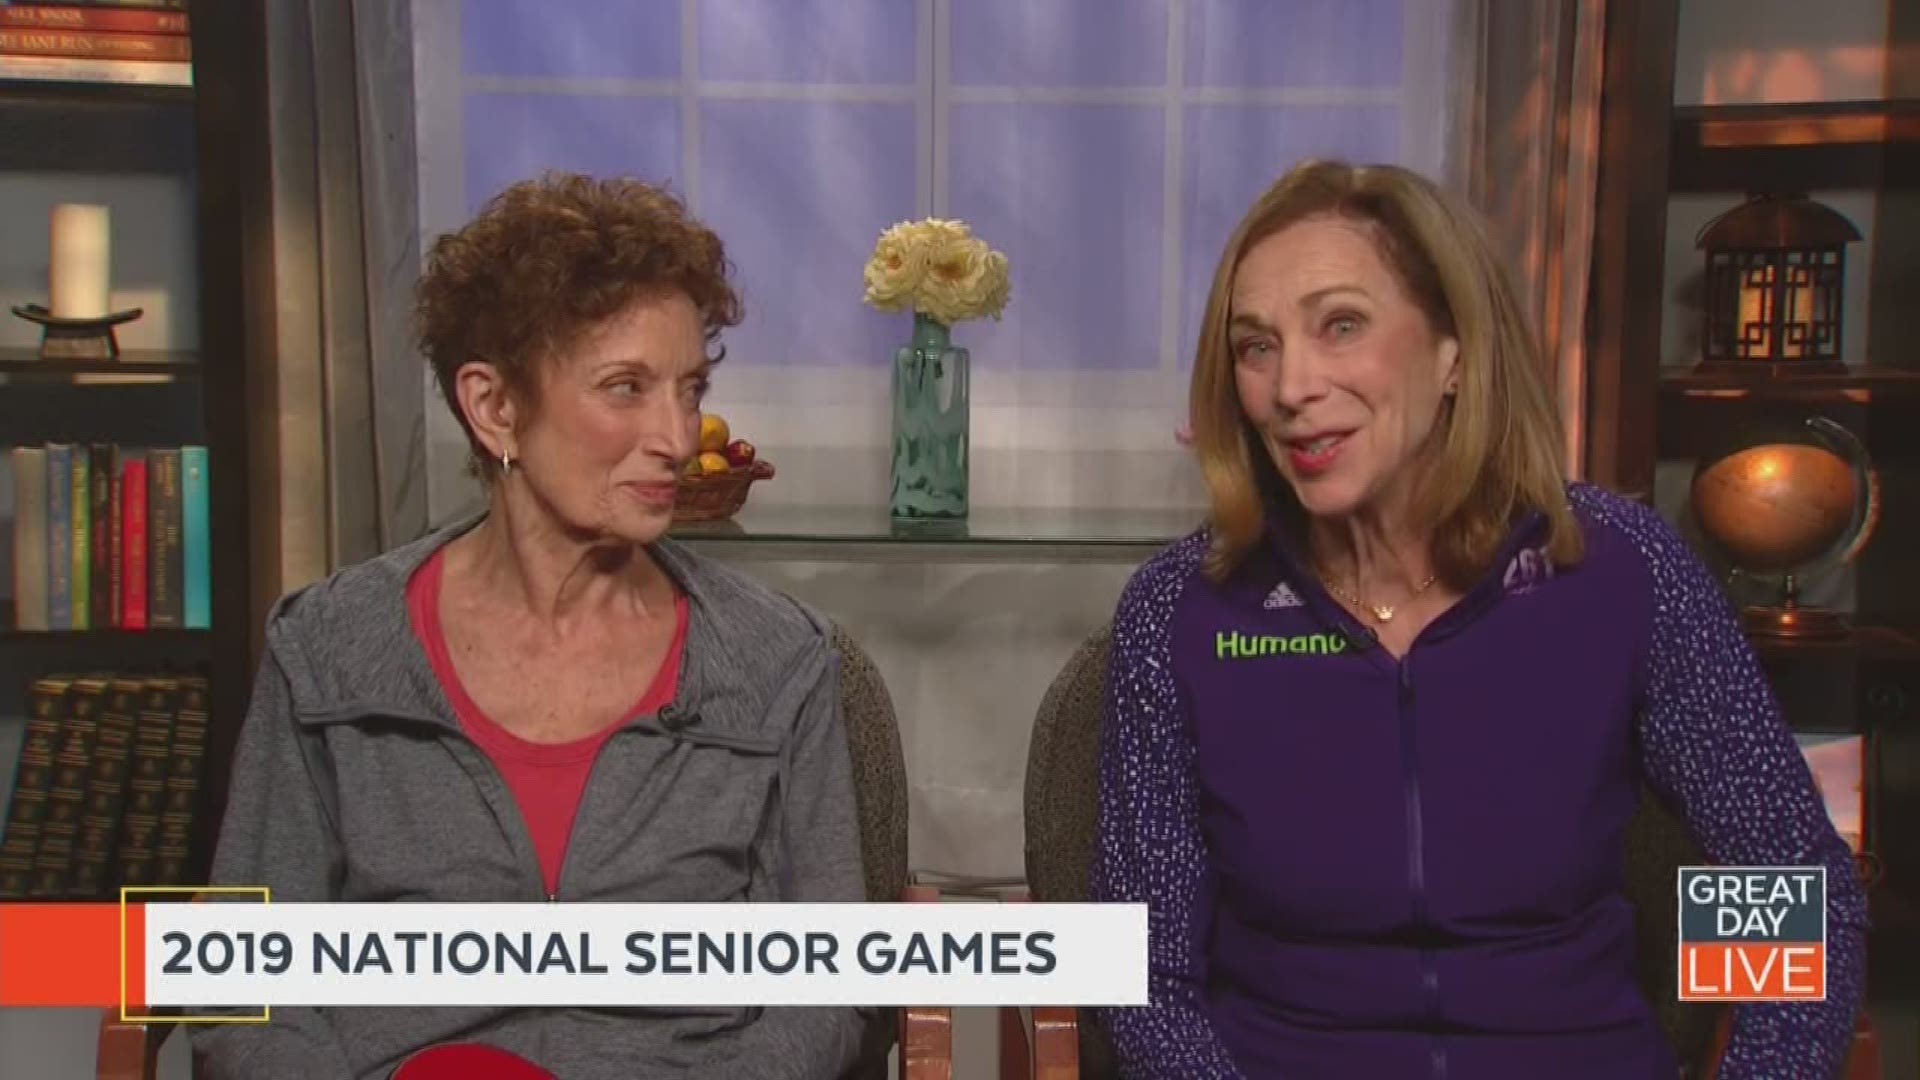 Growing older doesn’t mean you have to stop moving. The National Senior Games, presented by Humana, kicks off June 14 in Albuquerque, New Mexico and the participants are passionate about cultivating a natural culture of active aging. We spoke with athletes, Katherine Switzer and Carol Klenfner. Switzer is an avid runner, and was the first woman to officially enter and run in the Boston Marathon in 1967. Meanwhile, Carol Klenfner just recently started playing sports. She started playing ping pong a few years ago and fell in love with the game. Both ladies agree that more seniors should get moving! For more information go to nsga.com.